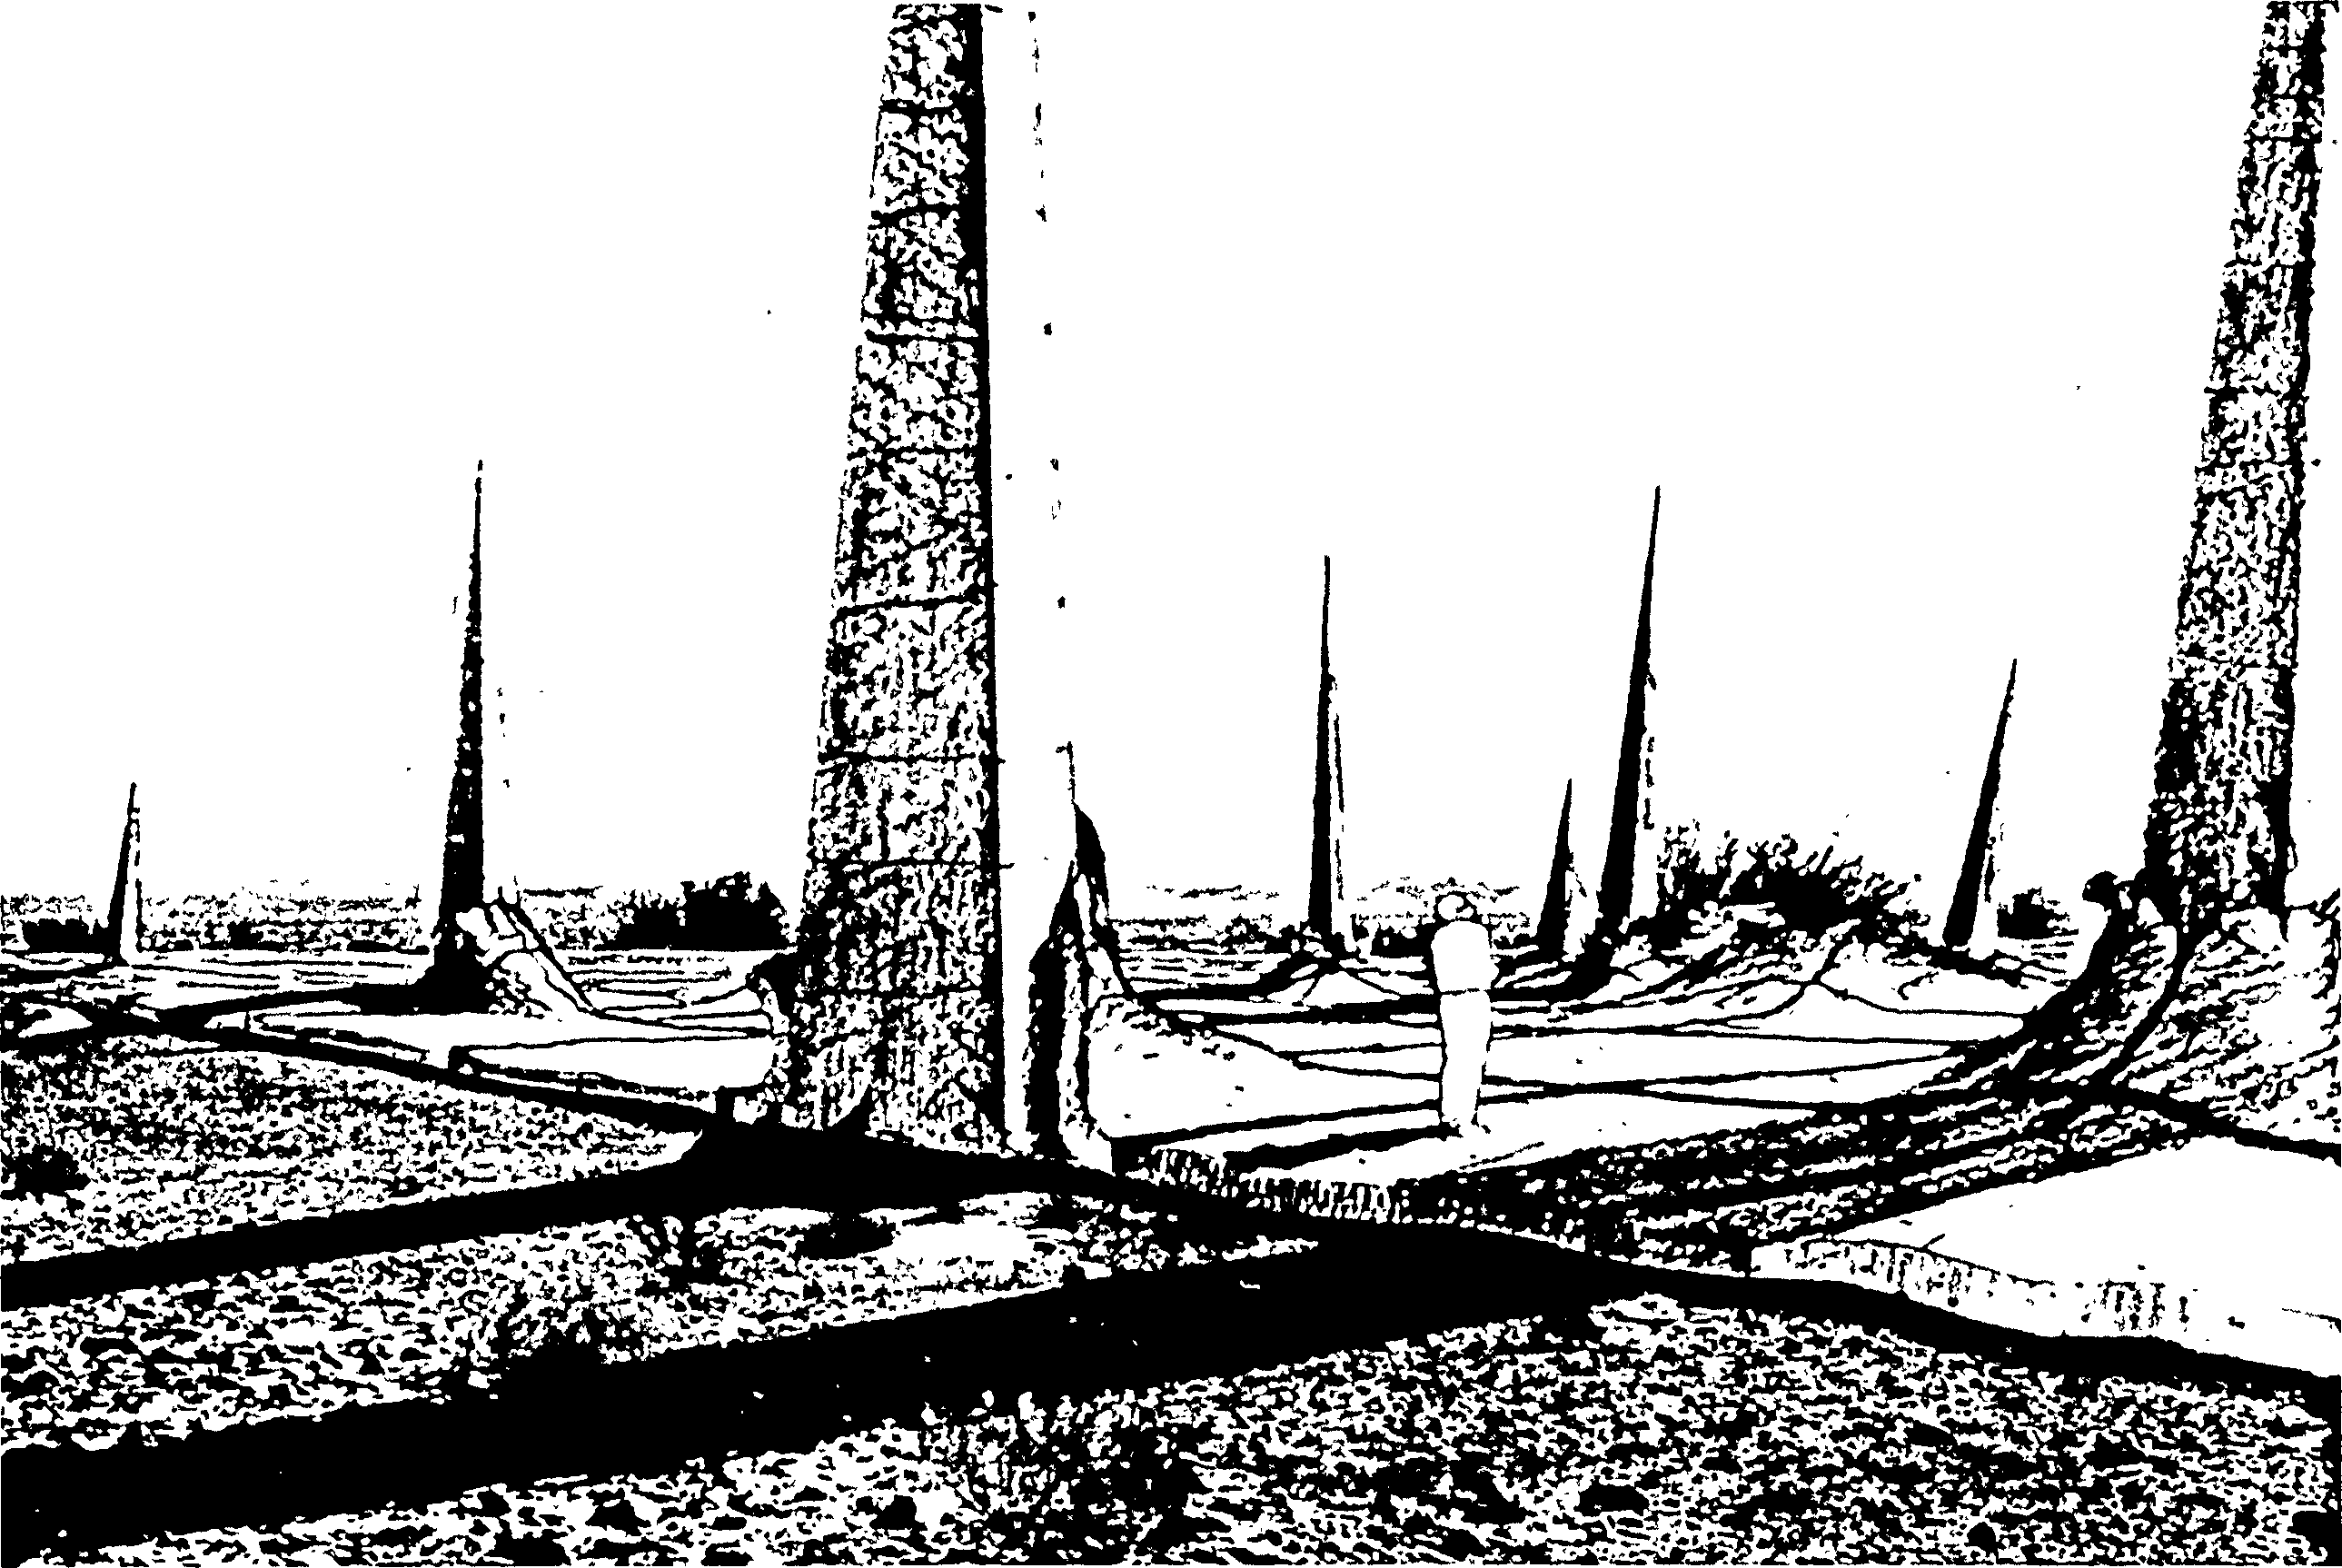 Drawing of a person standing on a paved surface deformed by the large stone spikes jutting through it